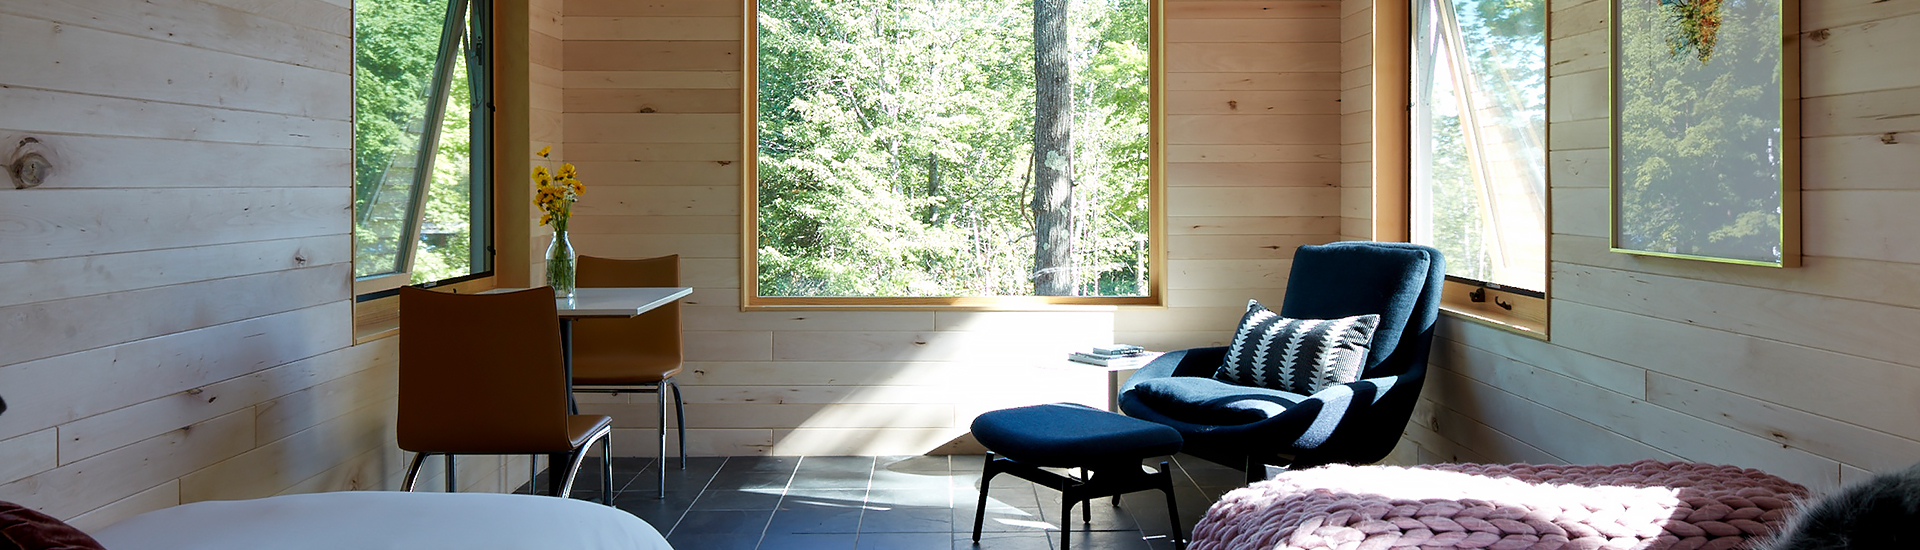 Internal view of a room with some windows and a lovely nature view